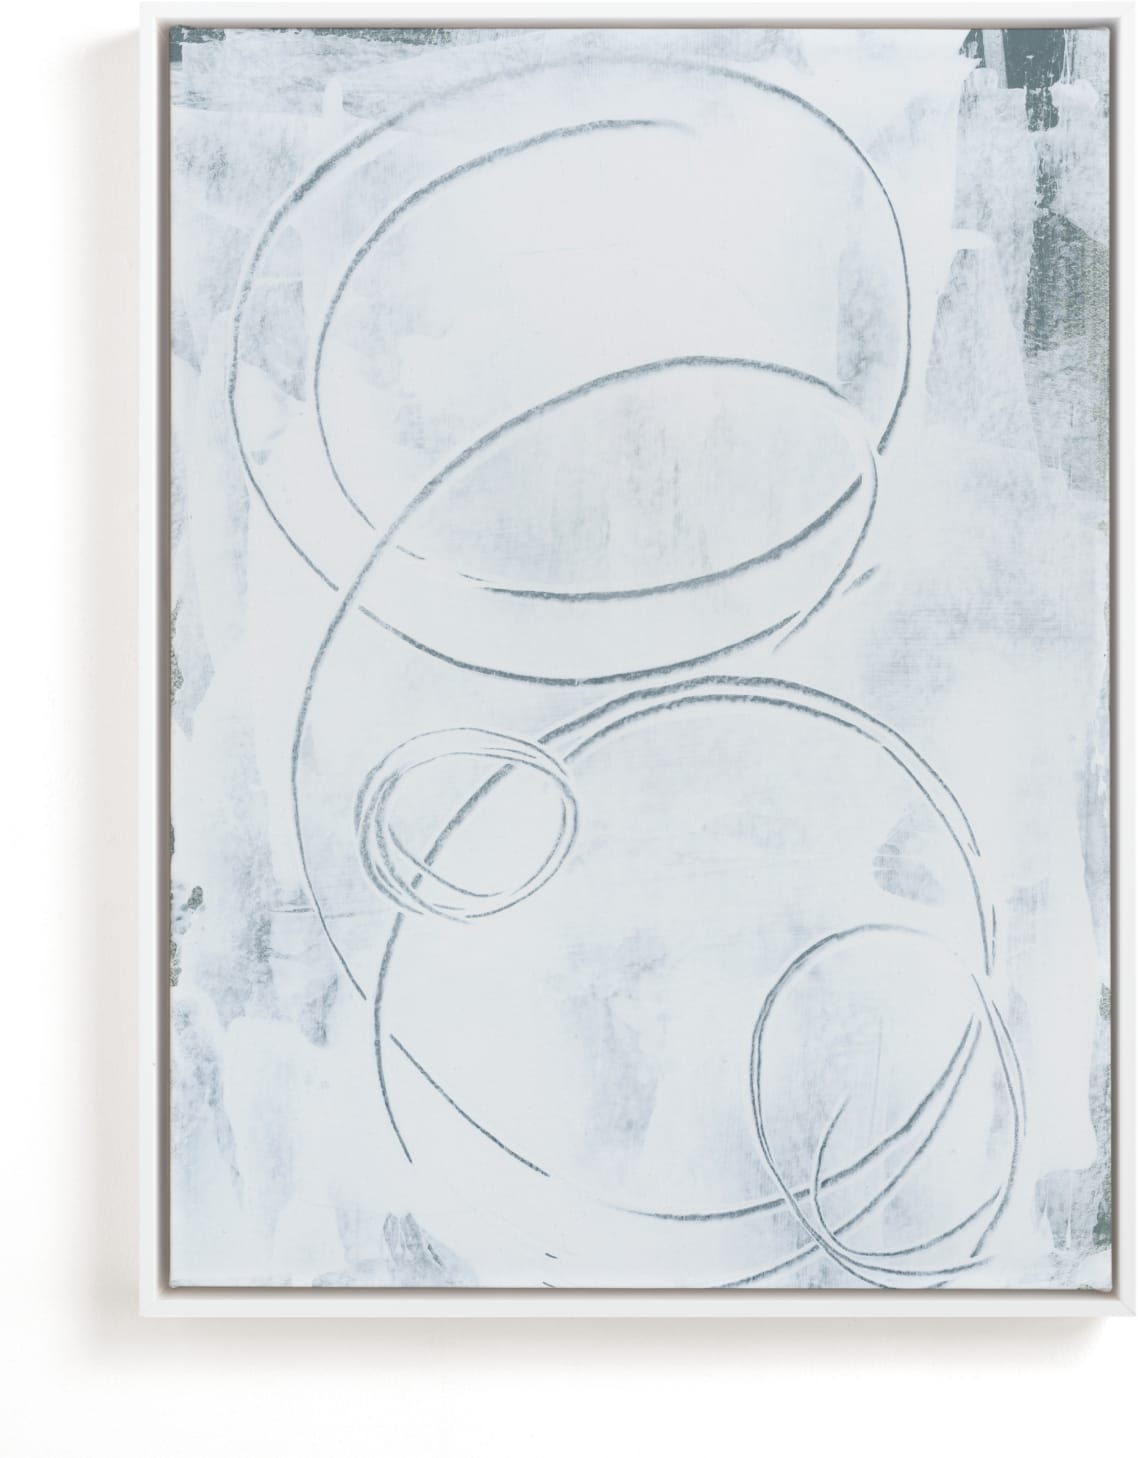 This is a blue, white, grey art by Julia Contacessi called Innuendo No. 3.